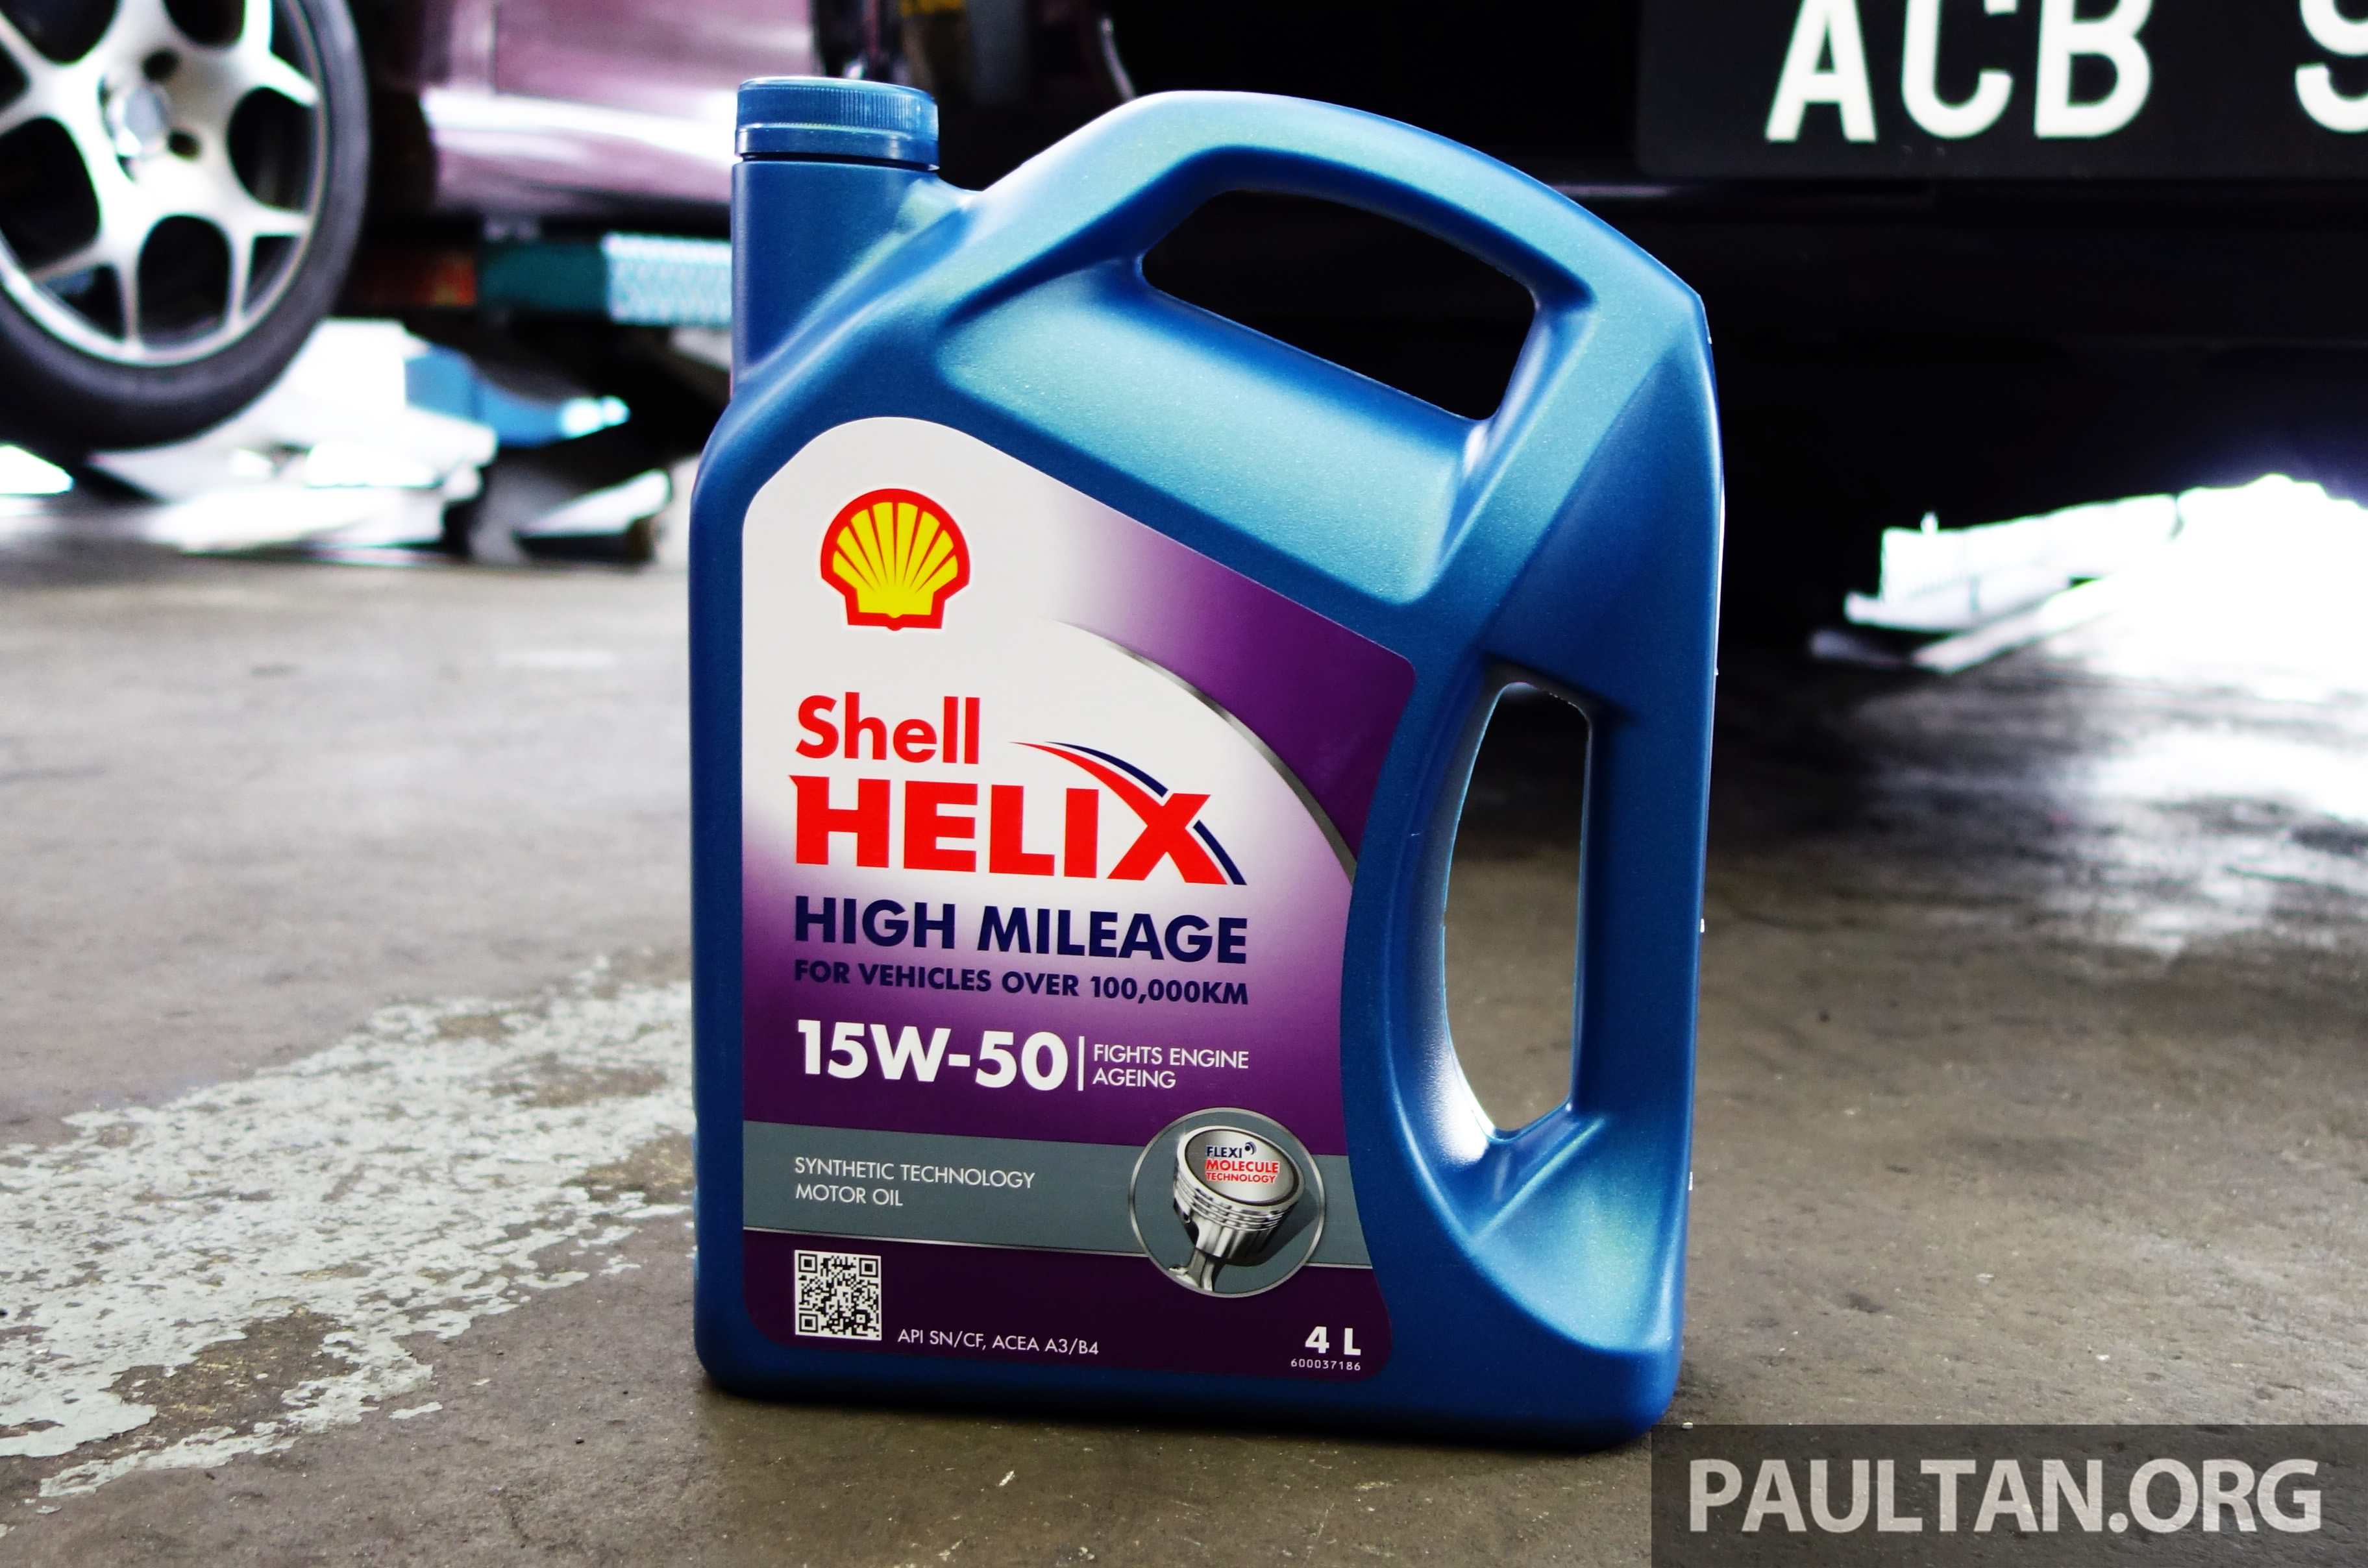 Shell helix high mileage